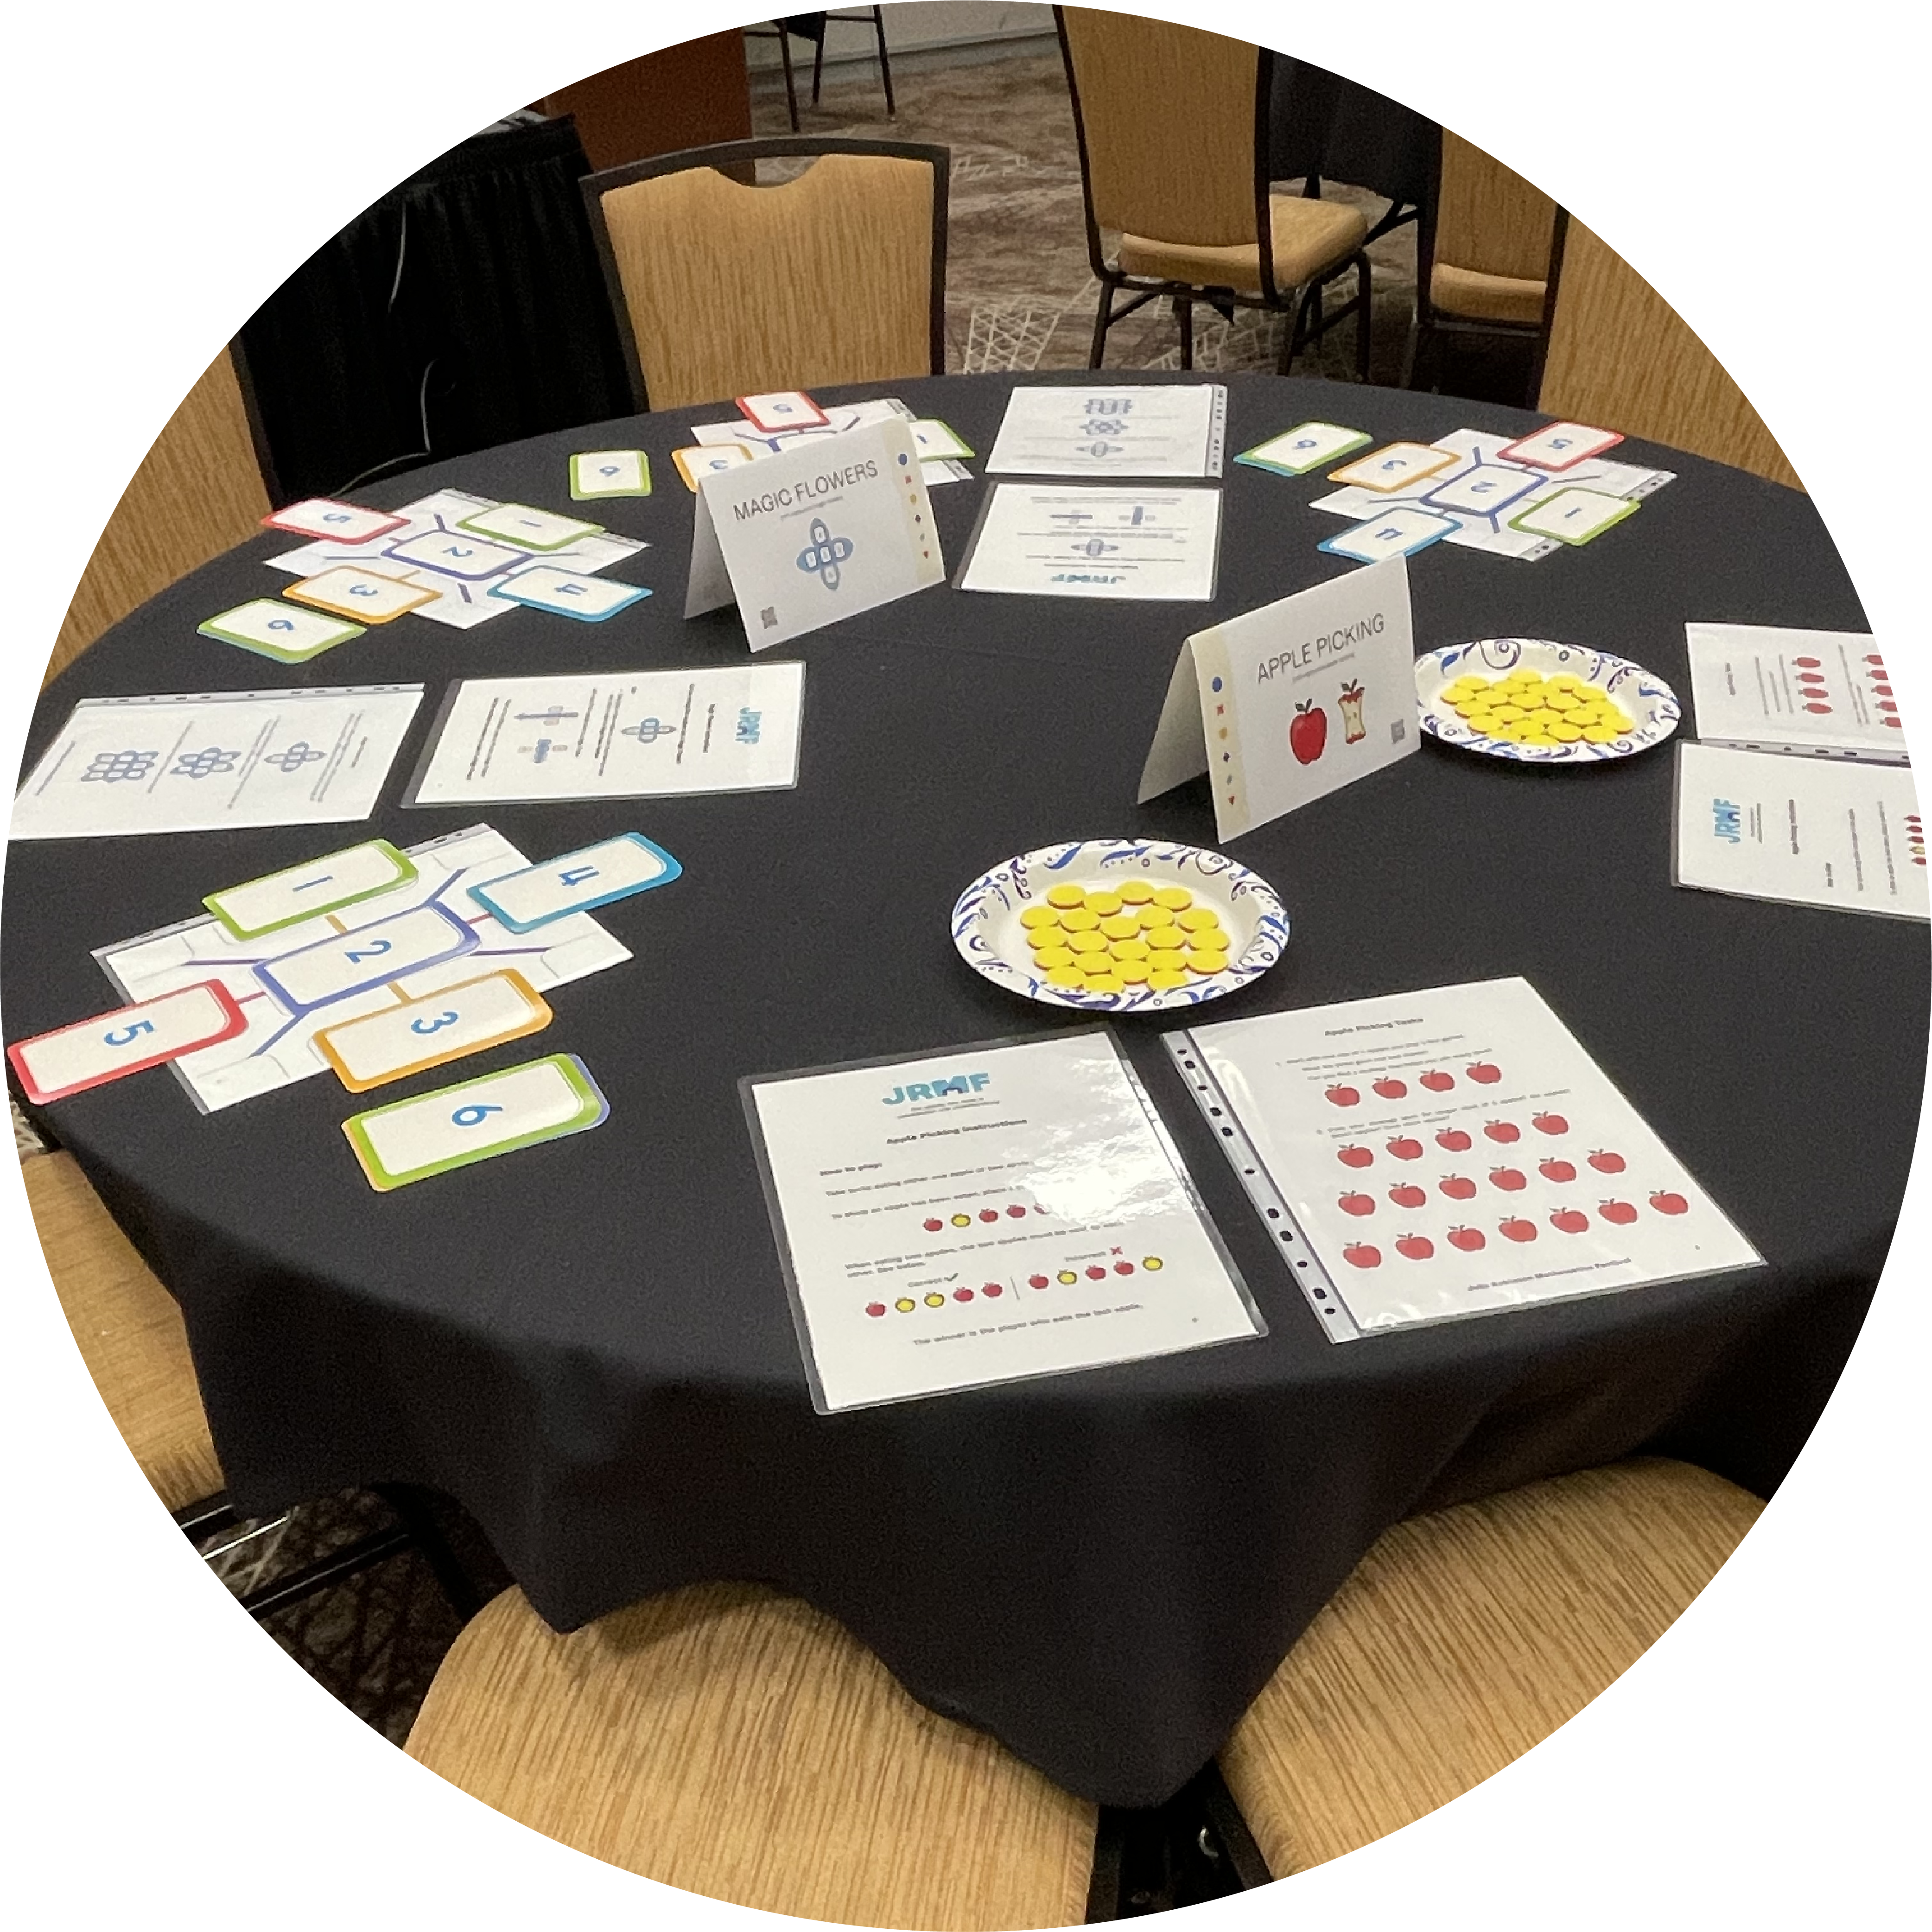 Table of math festival activities including handouts, number cards, and counters